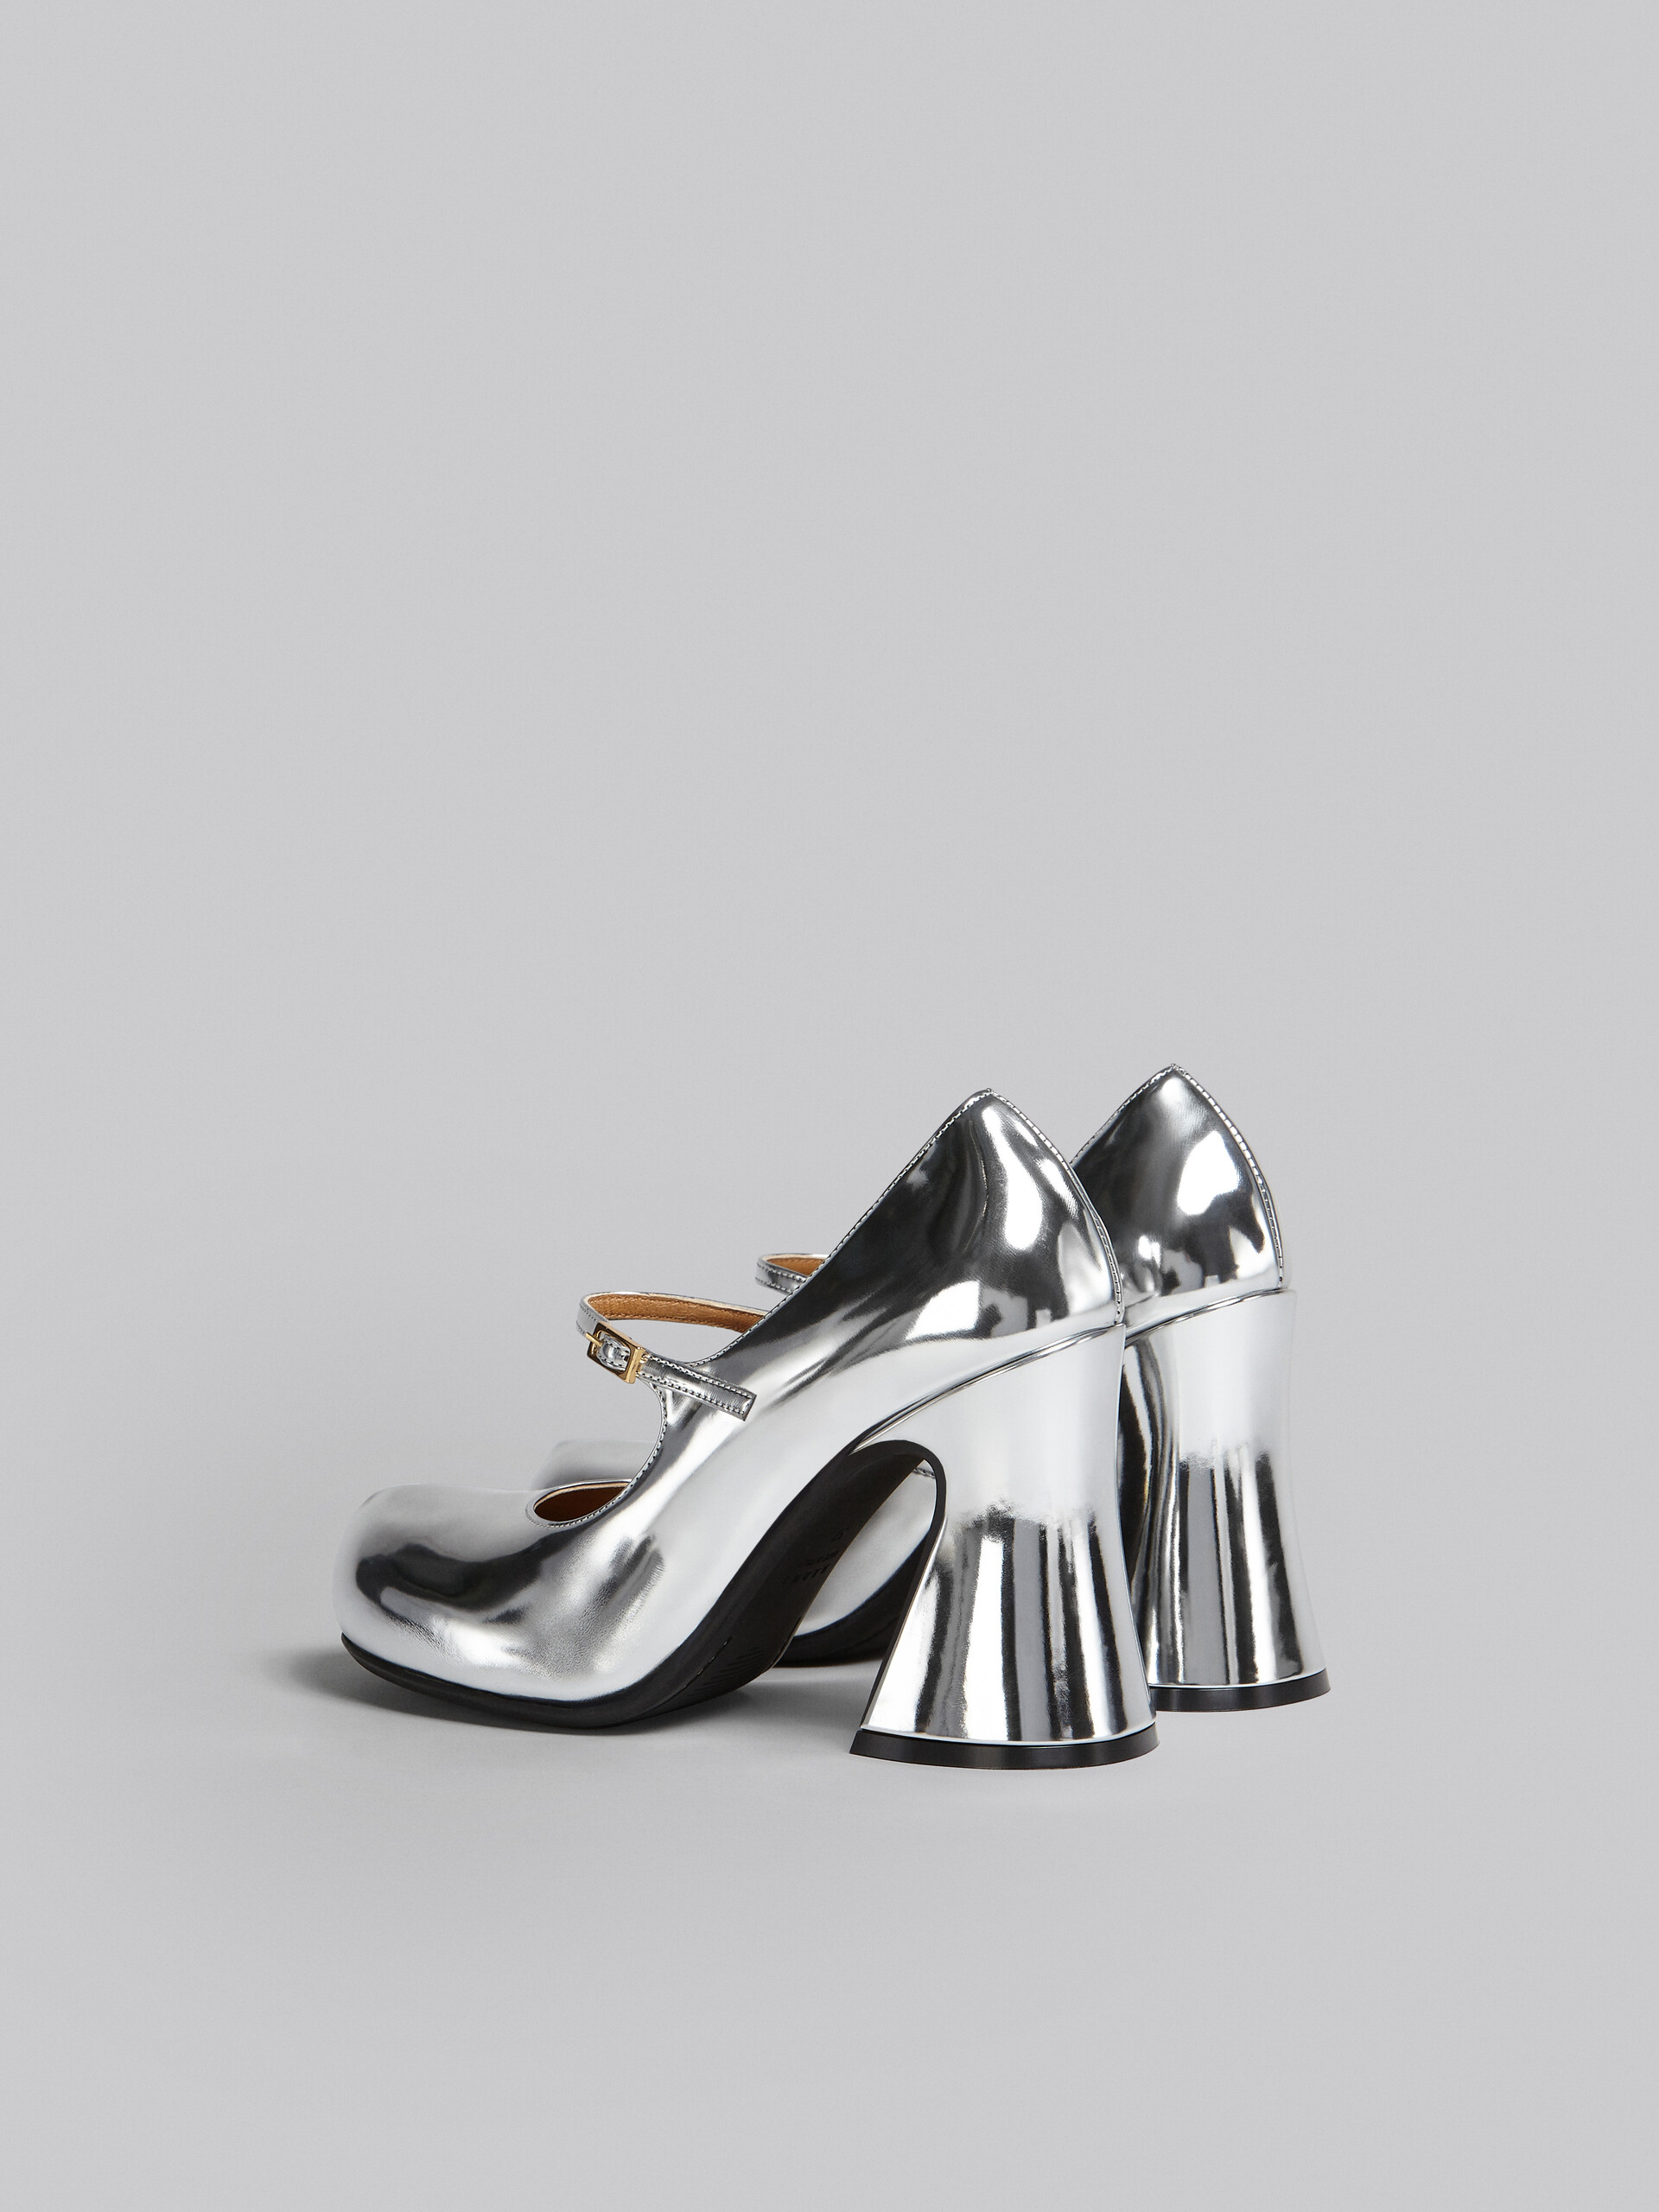 Silver mirrored leather Mary Janes - Sneakers - Image 3